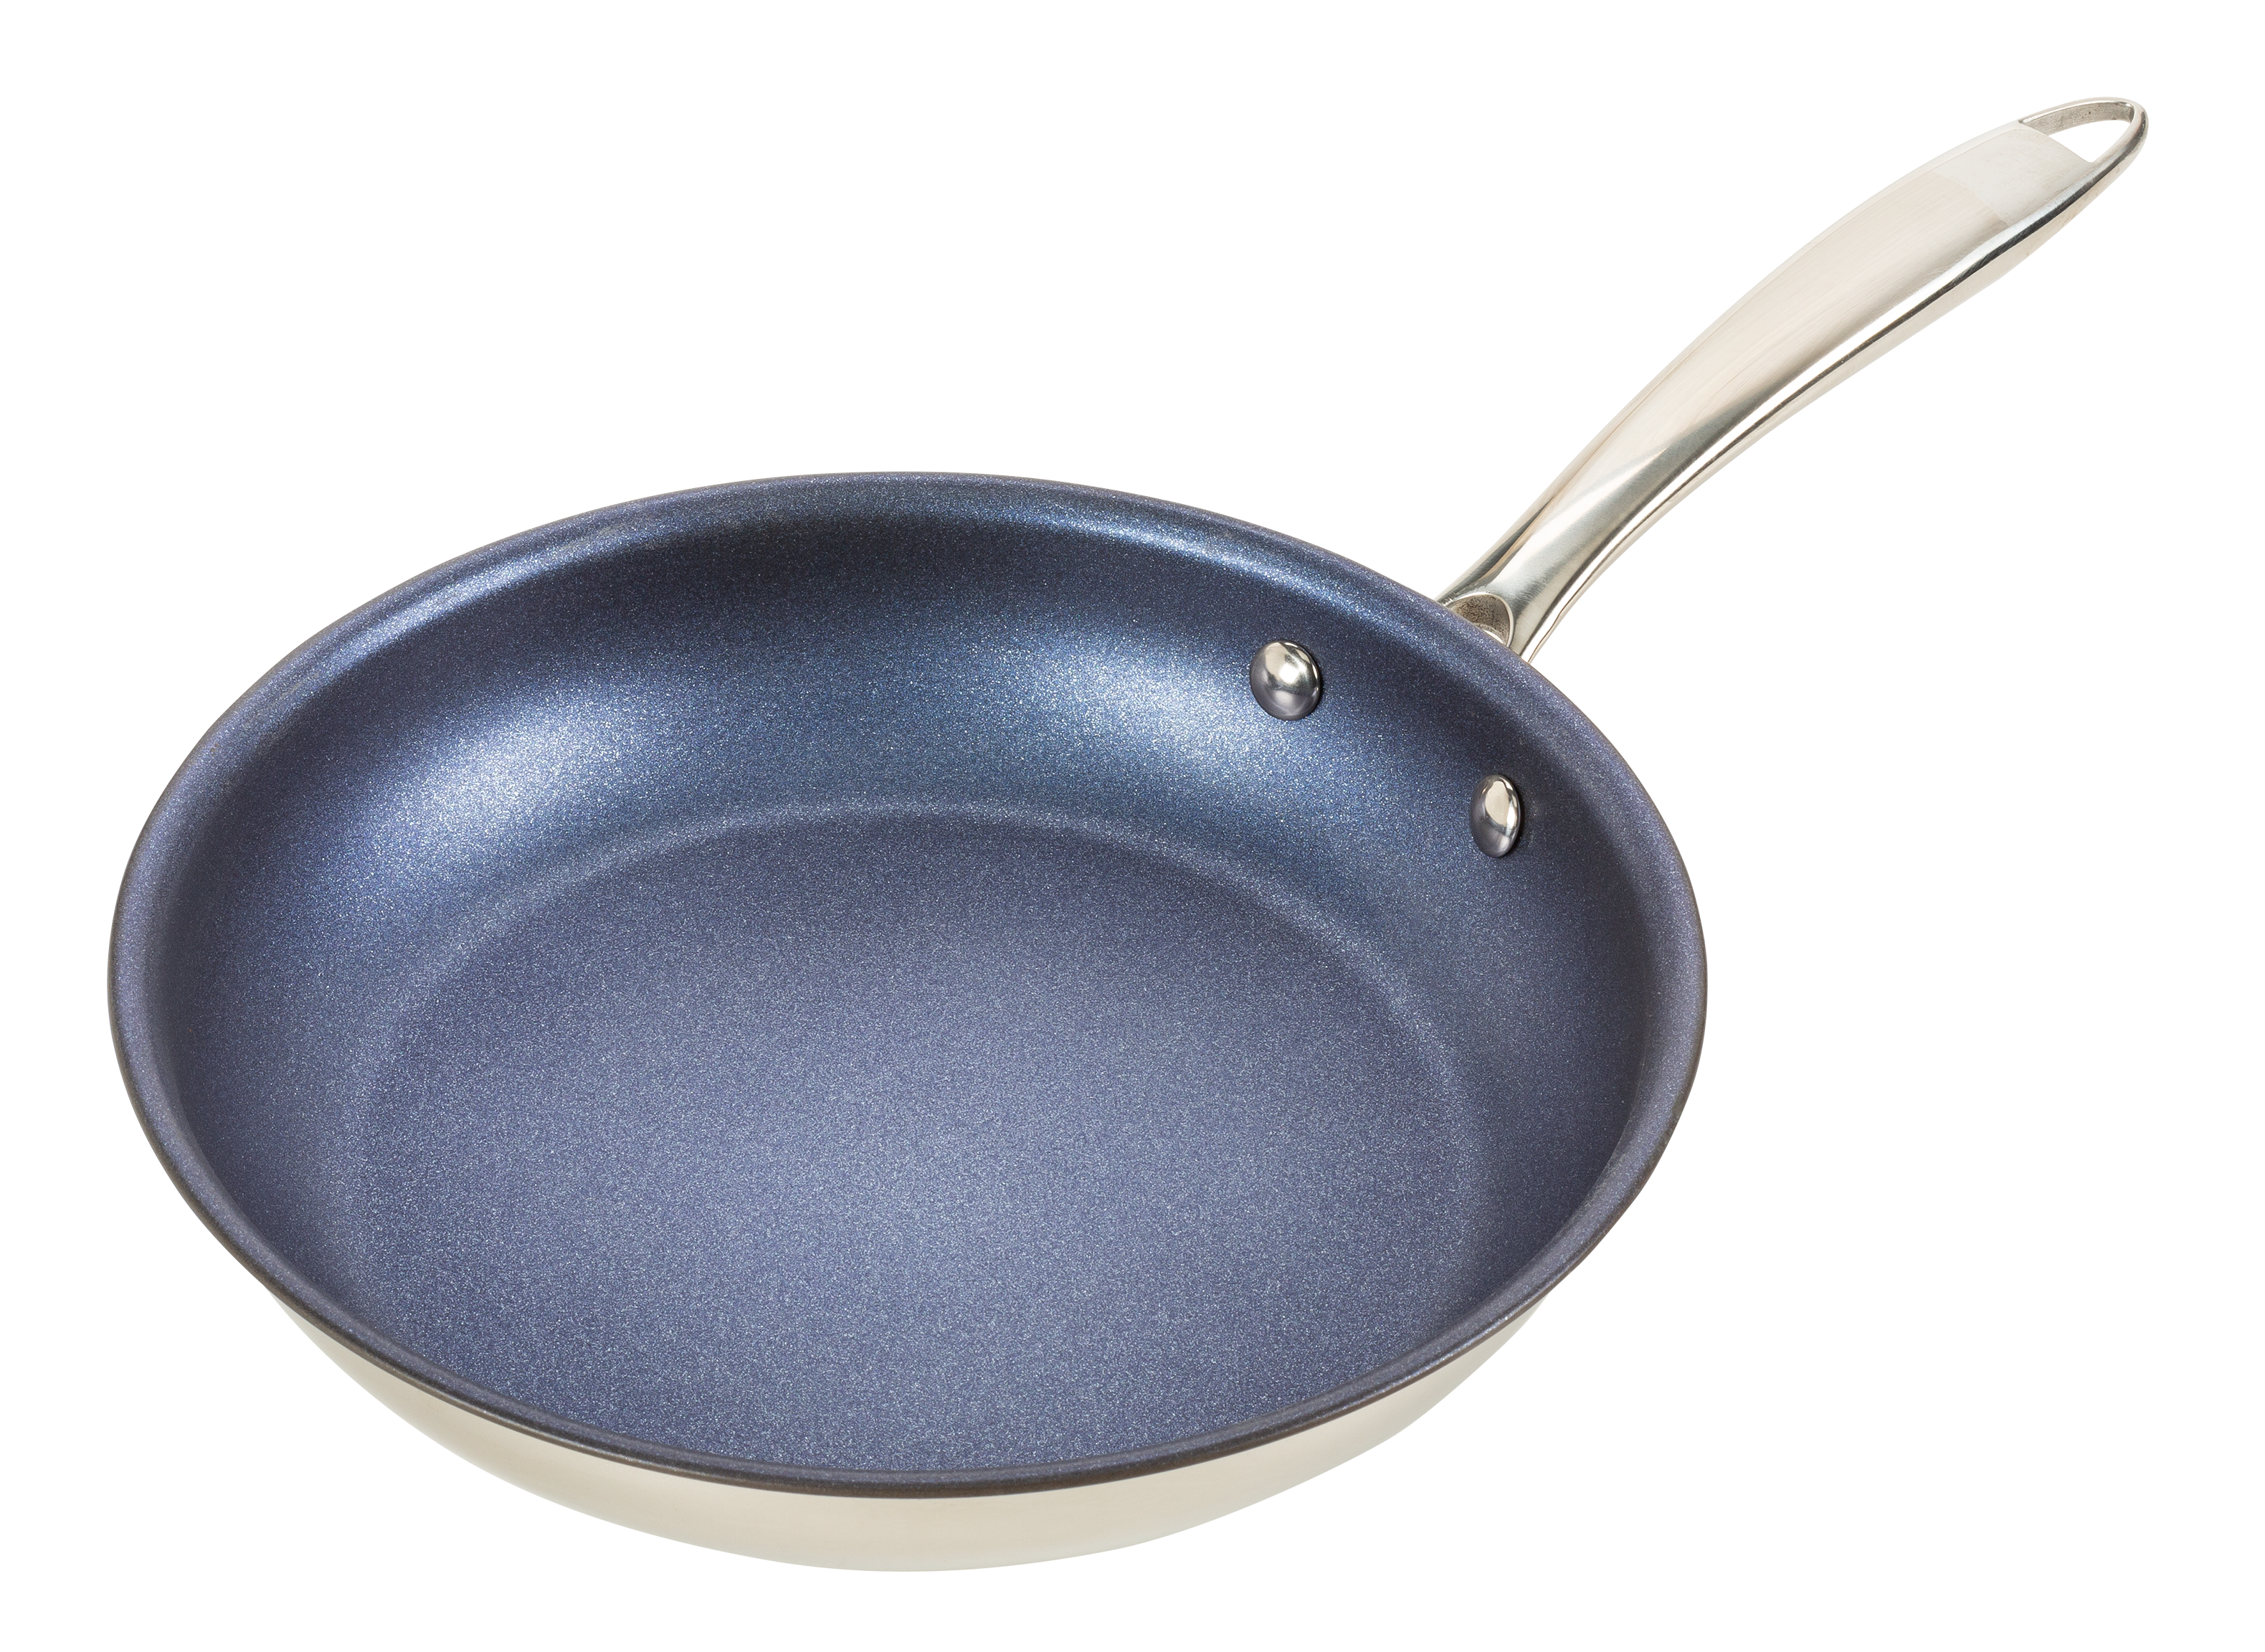 https://crdms.images.consumerreports.org/prod/products/cr/models/405131-frying-pans-nonstick-granitestone-diamond-stainless-steel-tri-ply-base-blue-10025498.png